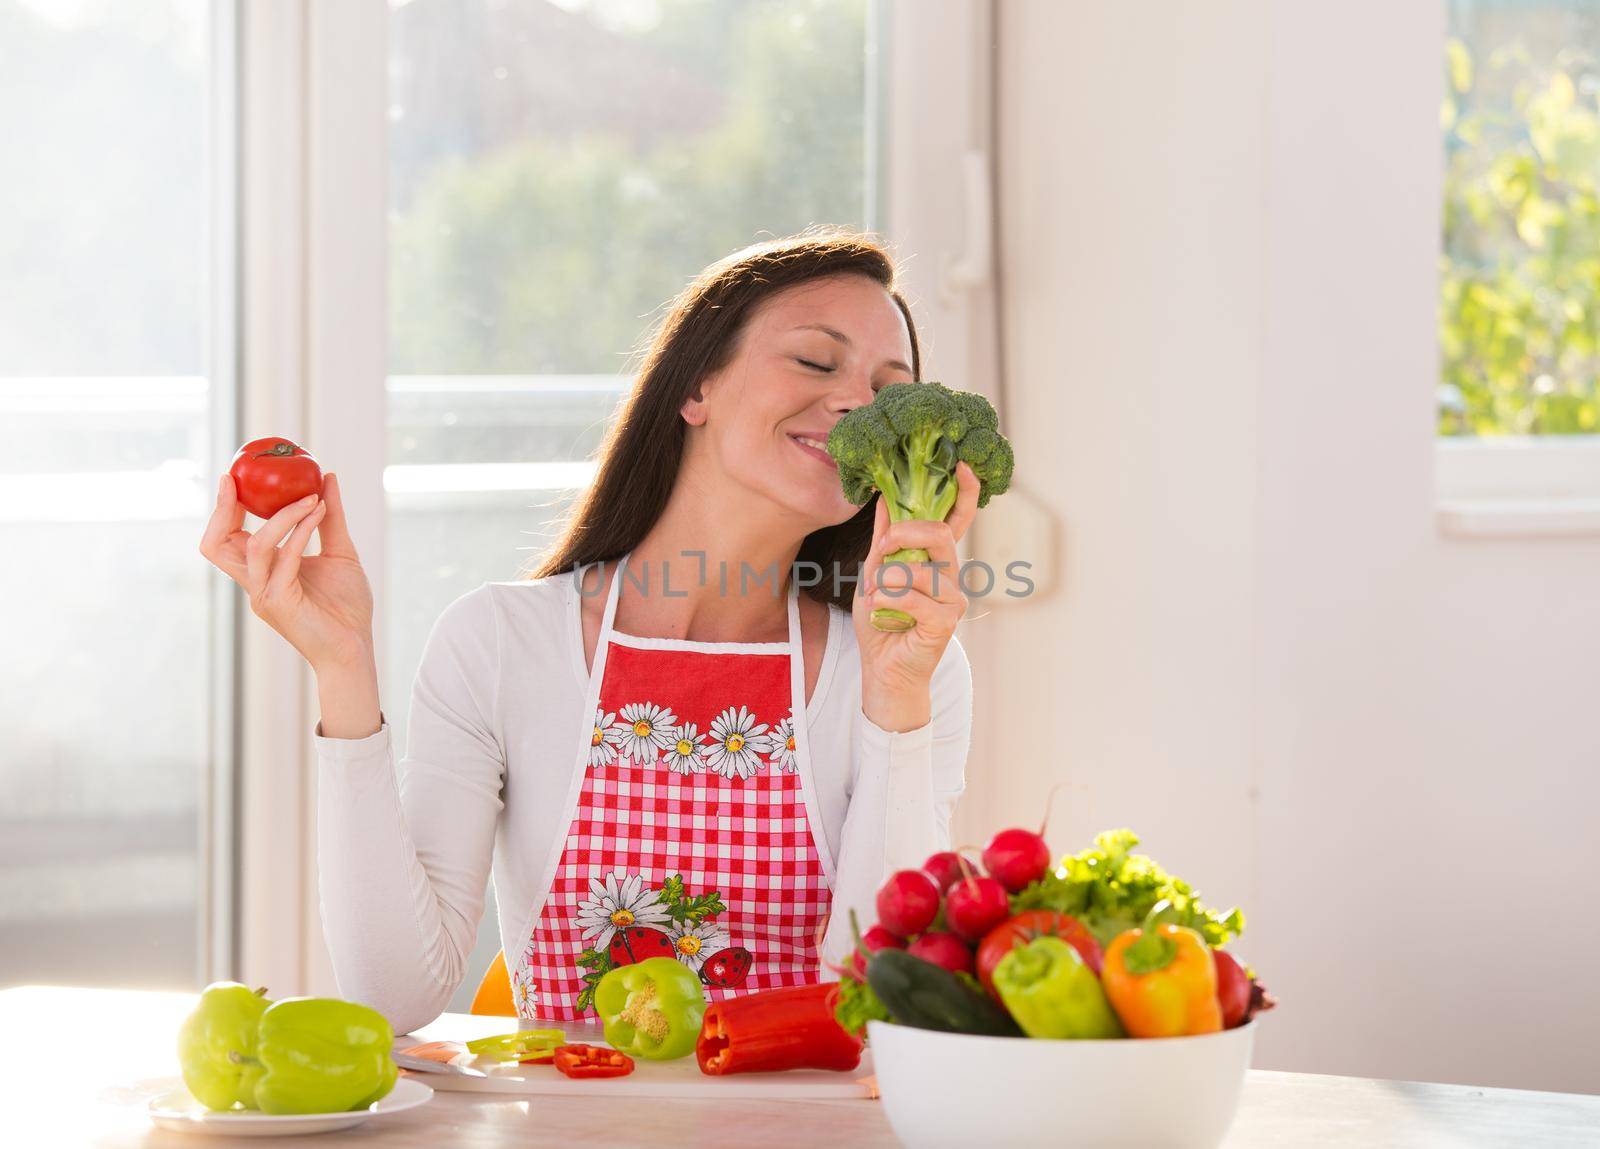 Satisfied woman sitting at kitchen table with vegetables in bowl and plates and enjoying smell of broccoli